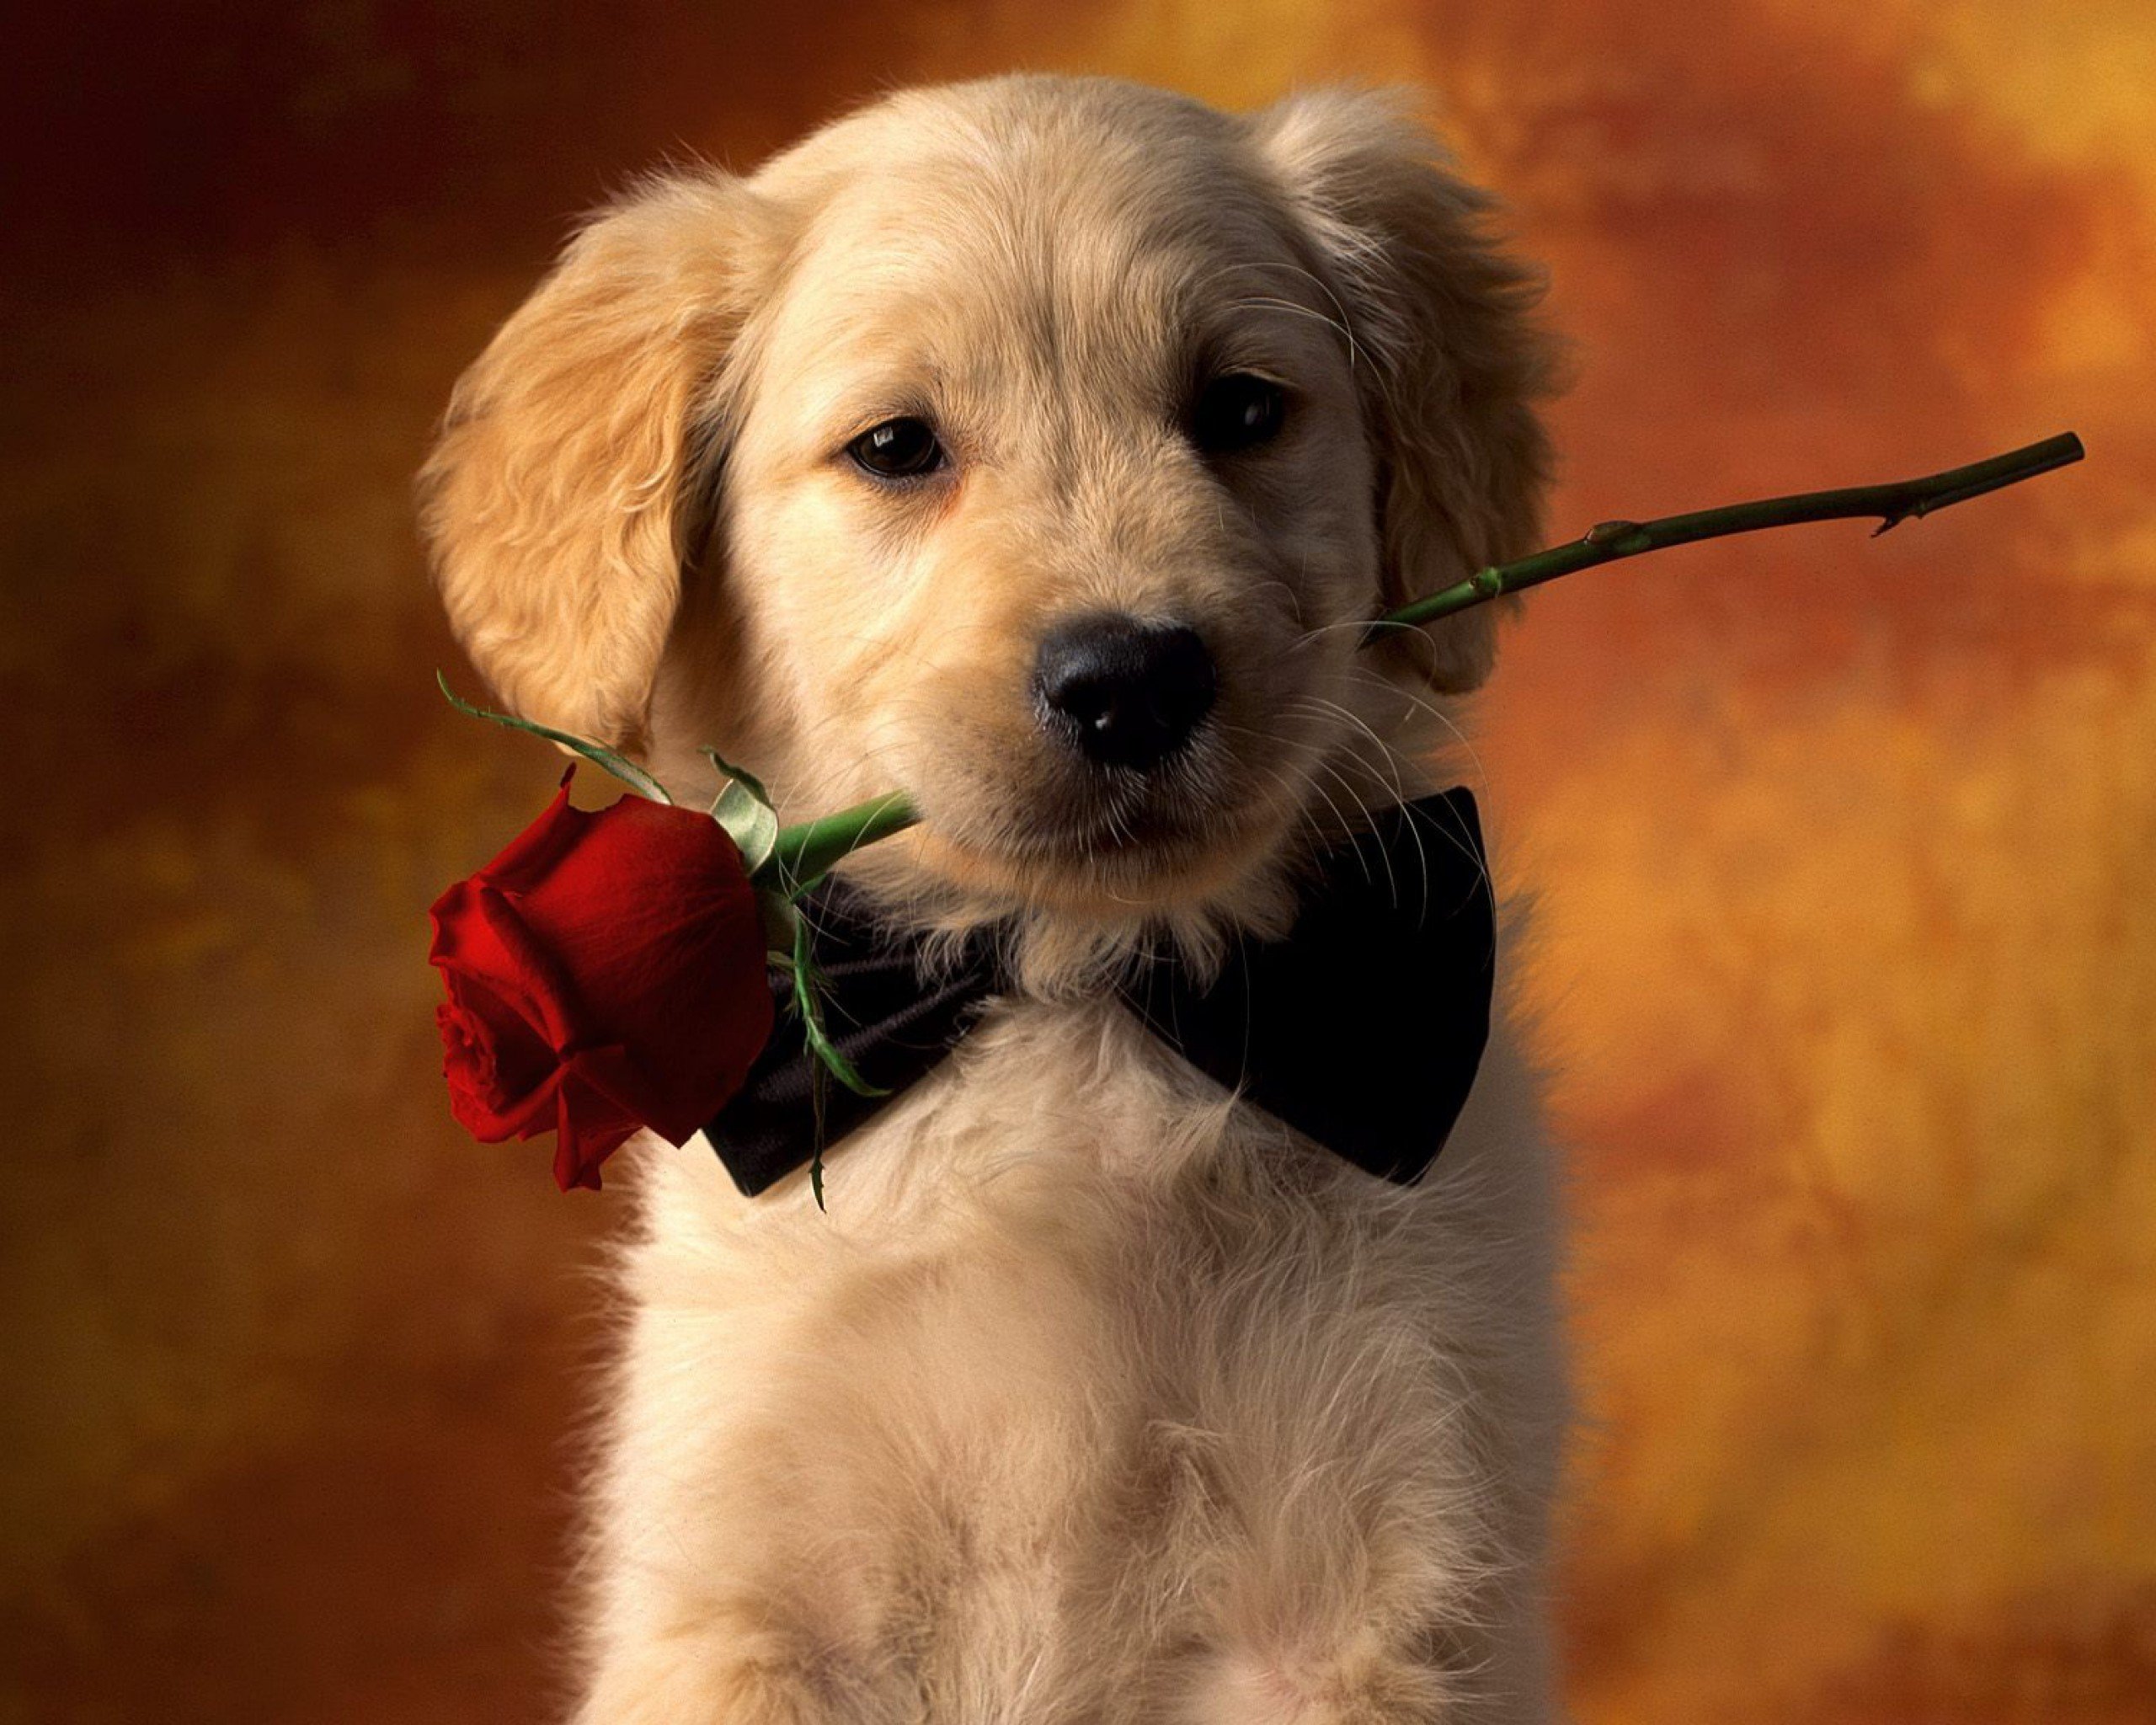 Cute doggy wallpapers